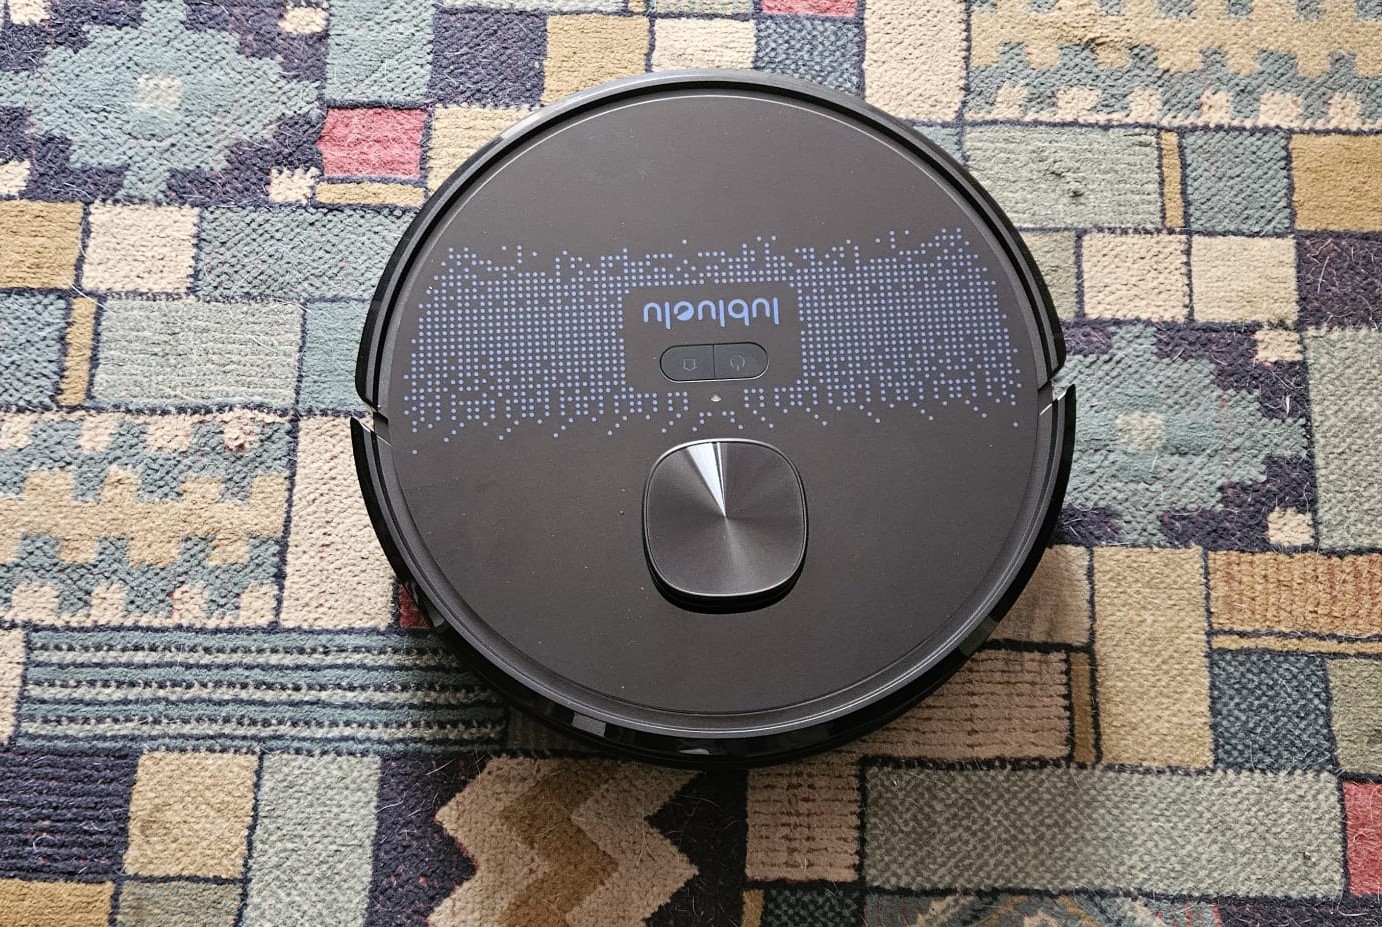 Lubluelu 2 in 1 robot vacuum mop review: cheap but functional?